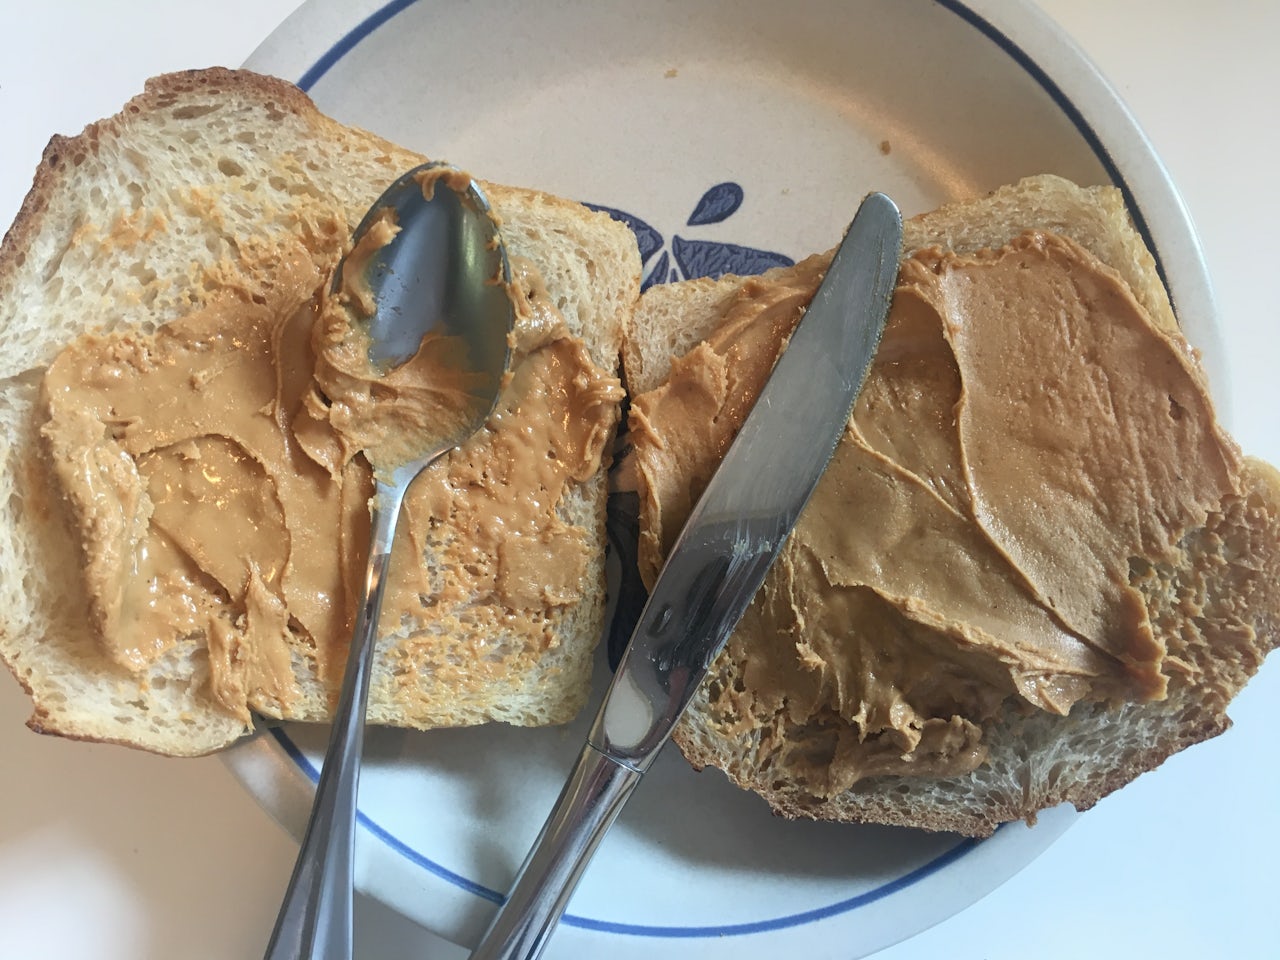 Use a spoon to spread jelly and peanut butter - Spudart